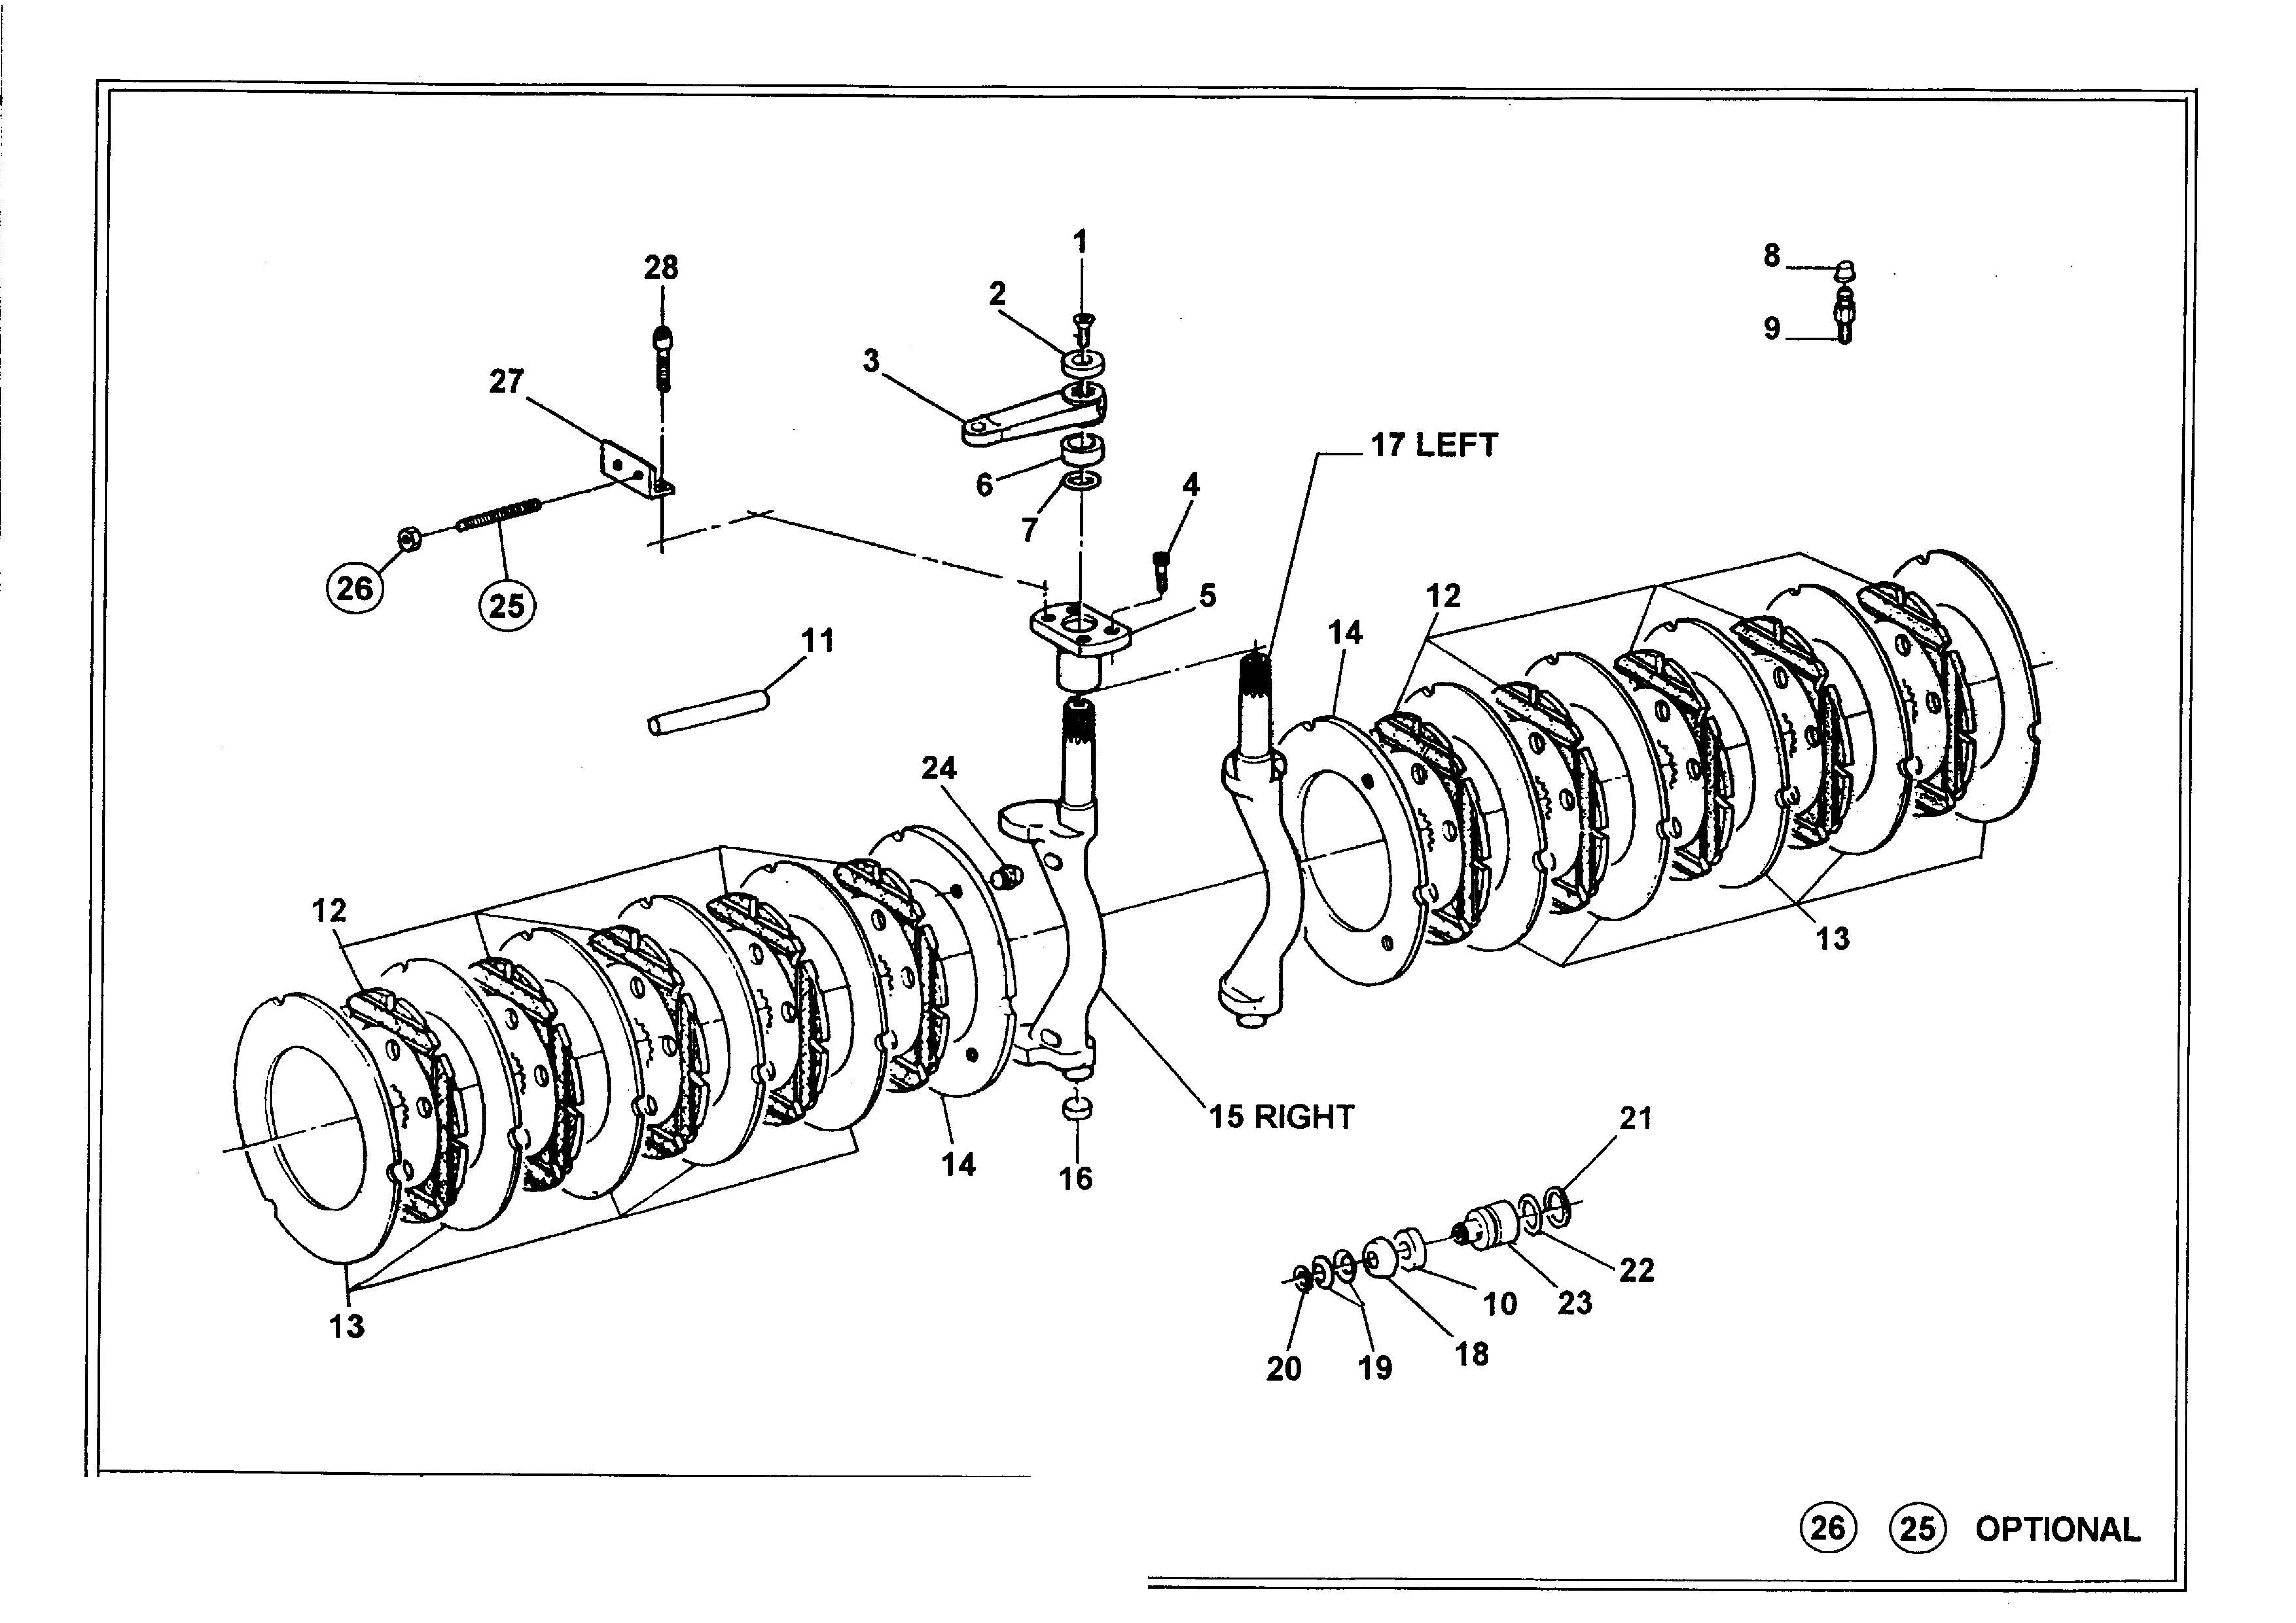 drawing for BRODERSON MANUFACTURING 055-00011 - CUP SPRING (figure 5)